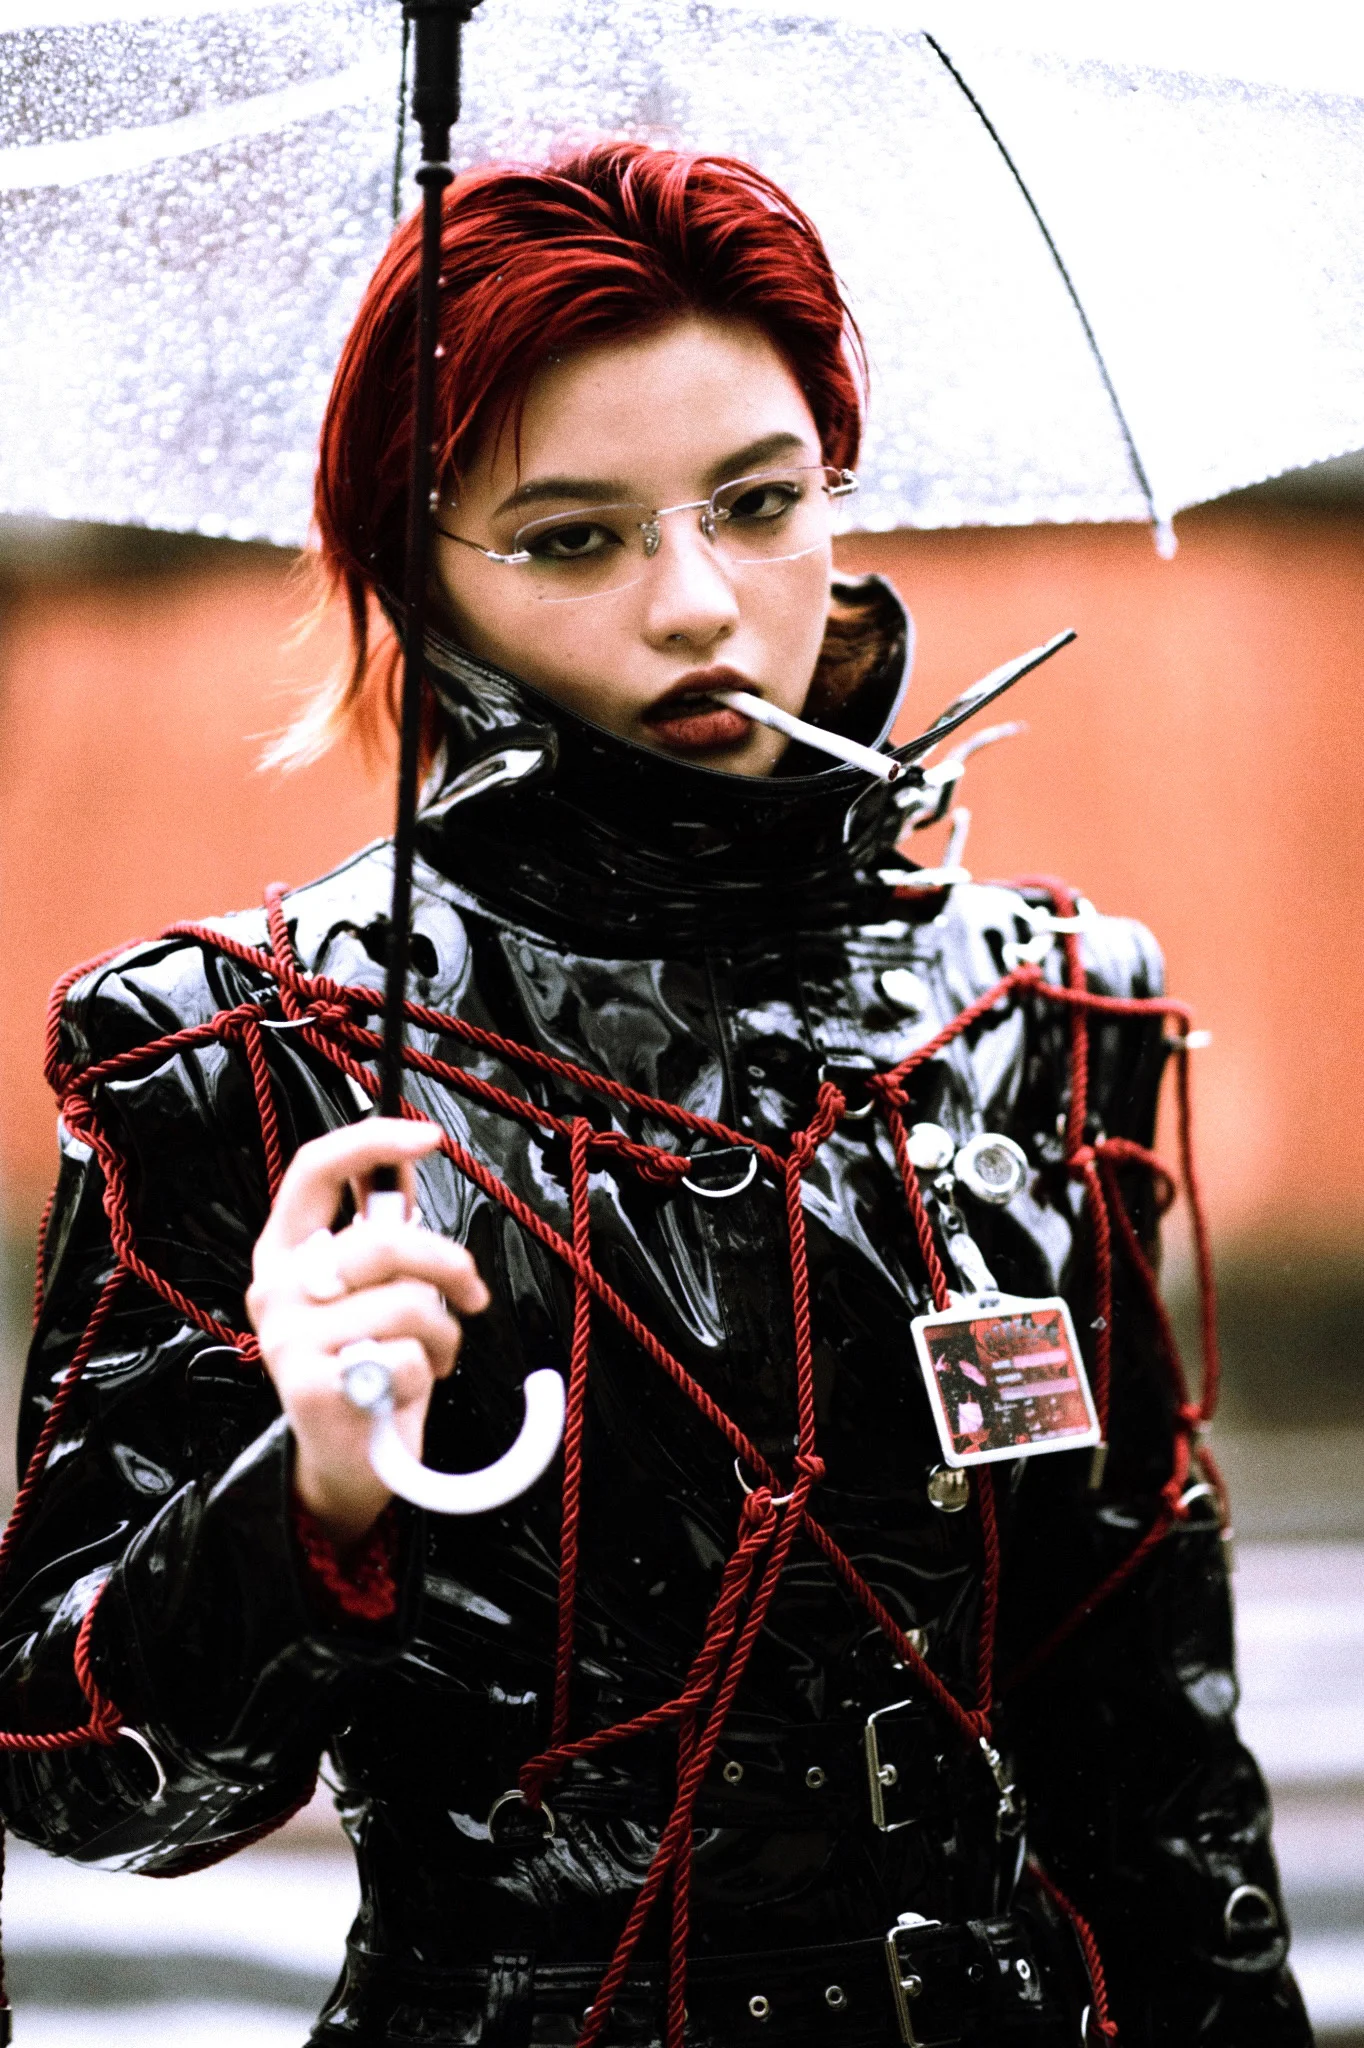 Sunken SINKing | SK Series TRA Strap Jipunk Style Black Red Cord Shiny Patent Leather Long Coat